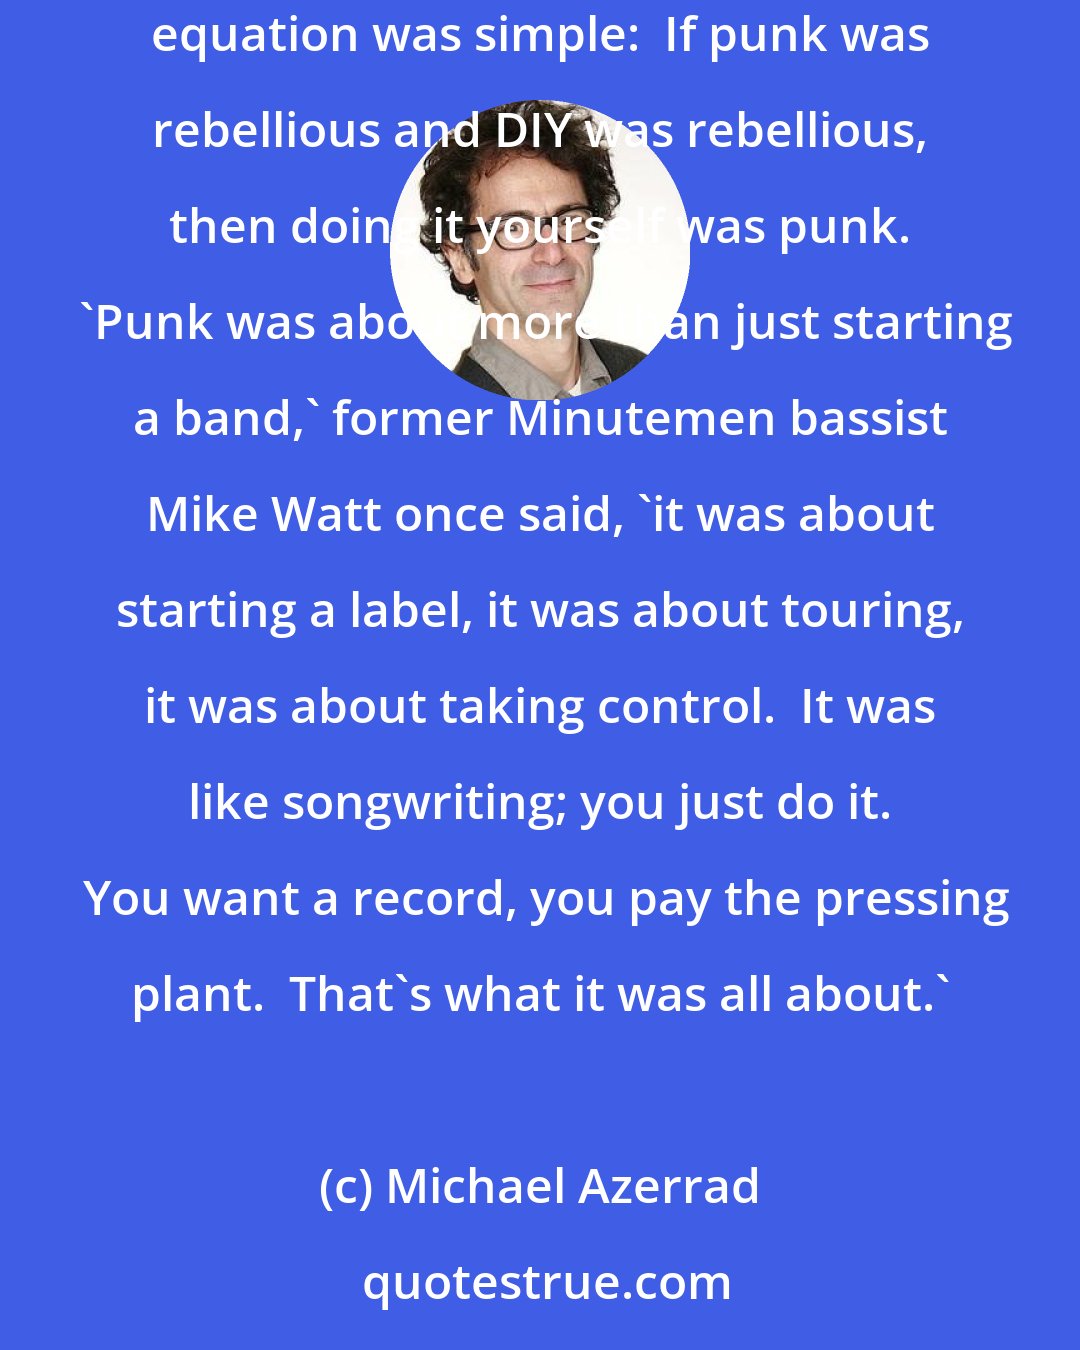 Michael Azerrad: To begin with, the key principle of American indie rock wasn't a circumscribed musical style; it was the punk ethos of DIY, or do-it-yourself.  The equation was simple:  If punk was rebellious and DIY was rebellious, then doing it yourself was punk.  'Punk was about more than just starting a band,' former Minutemen bassist Mike Watt once said, 'it was about starting a label, it was about touring, it was about taking control.  It was like songwriting; you just do it.  You want a record, you pay the pressing plant.  That's what it was all about.'